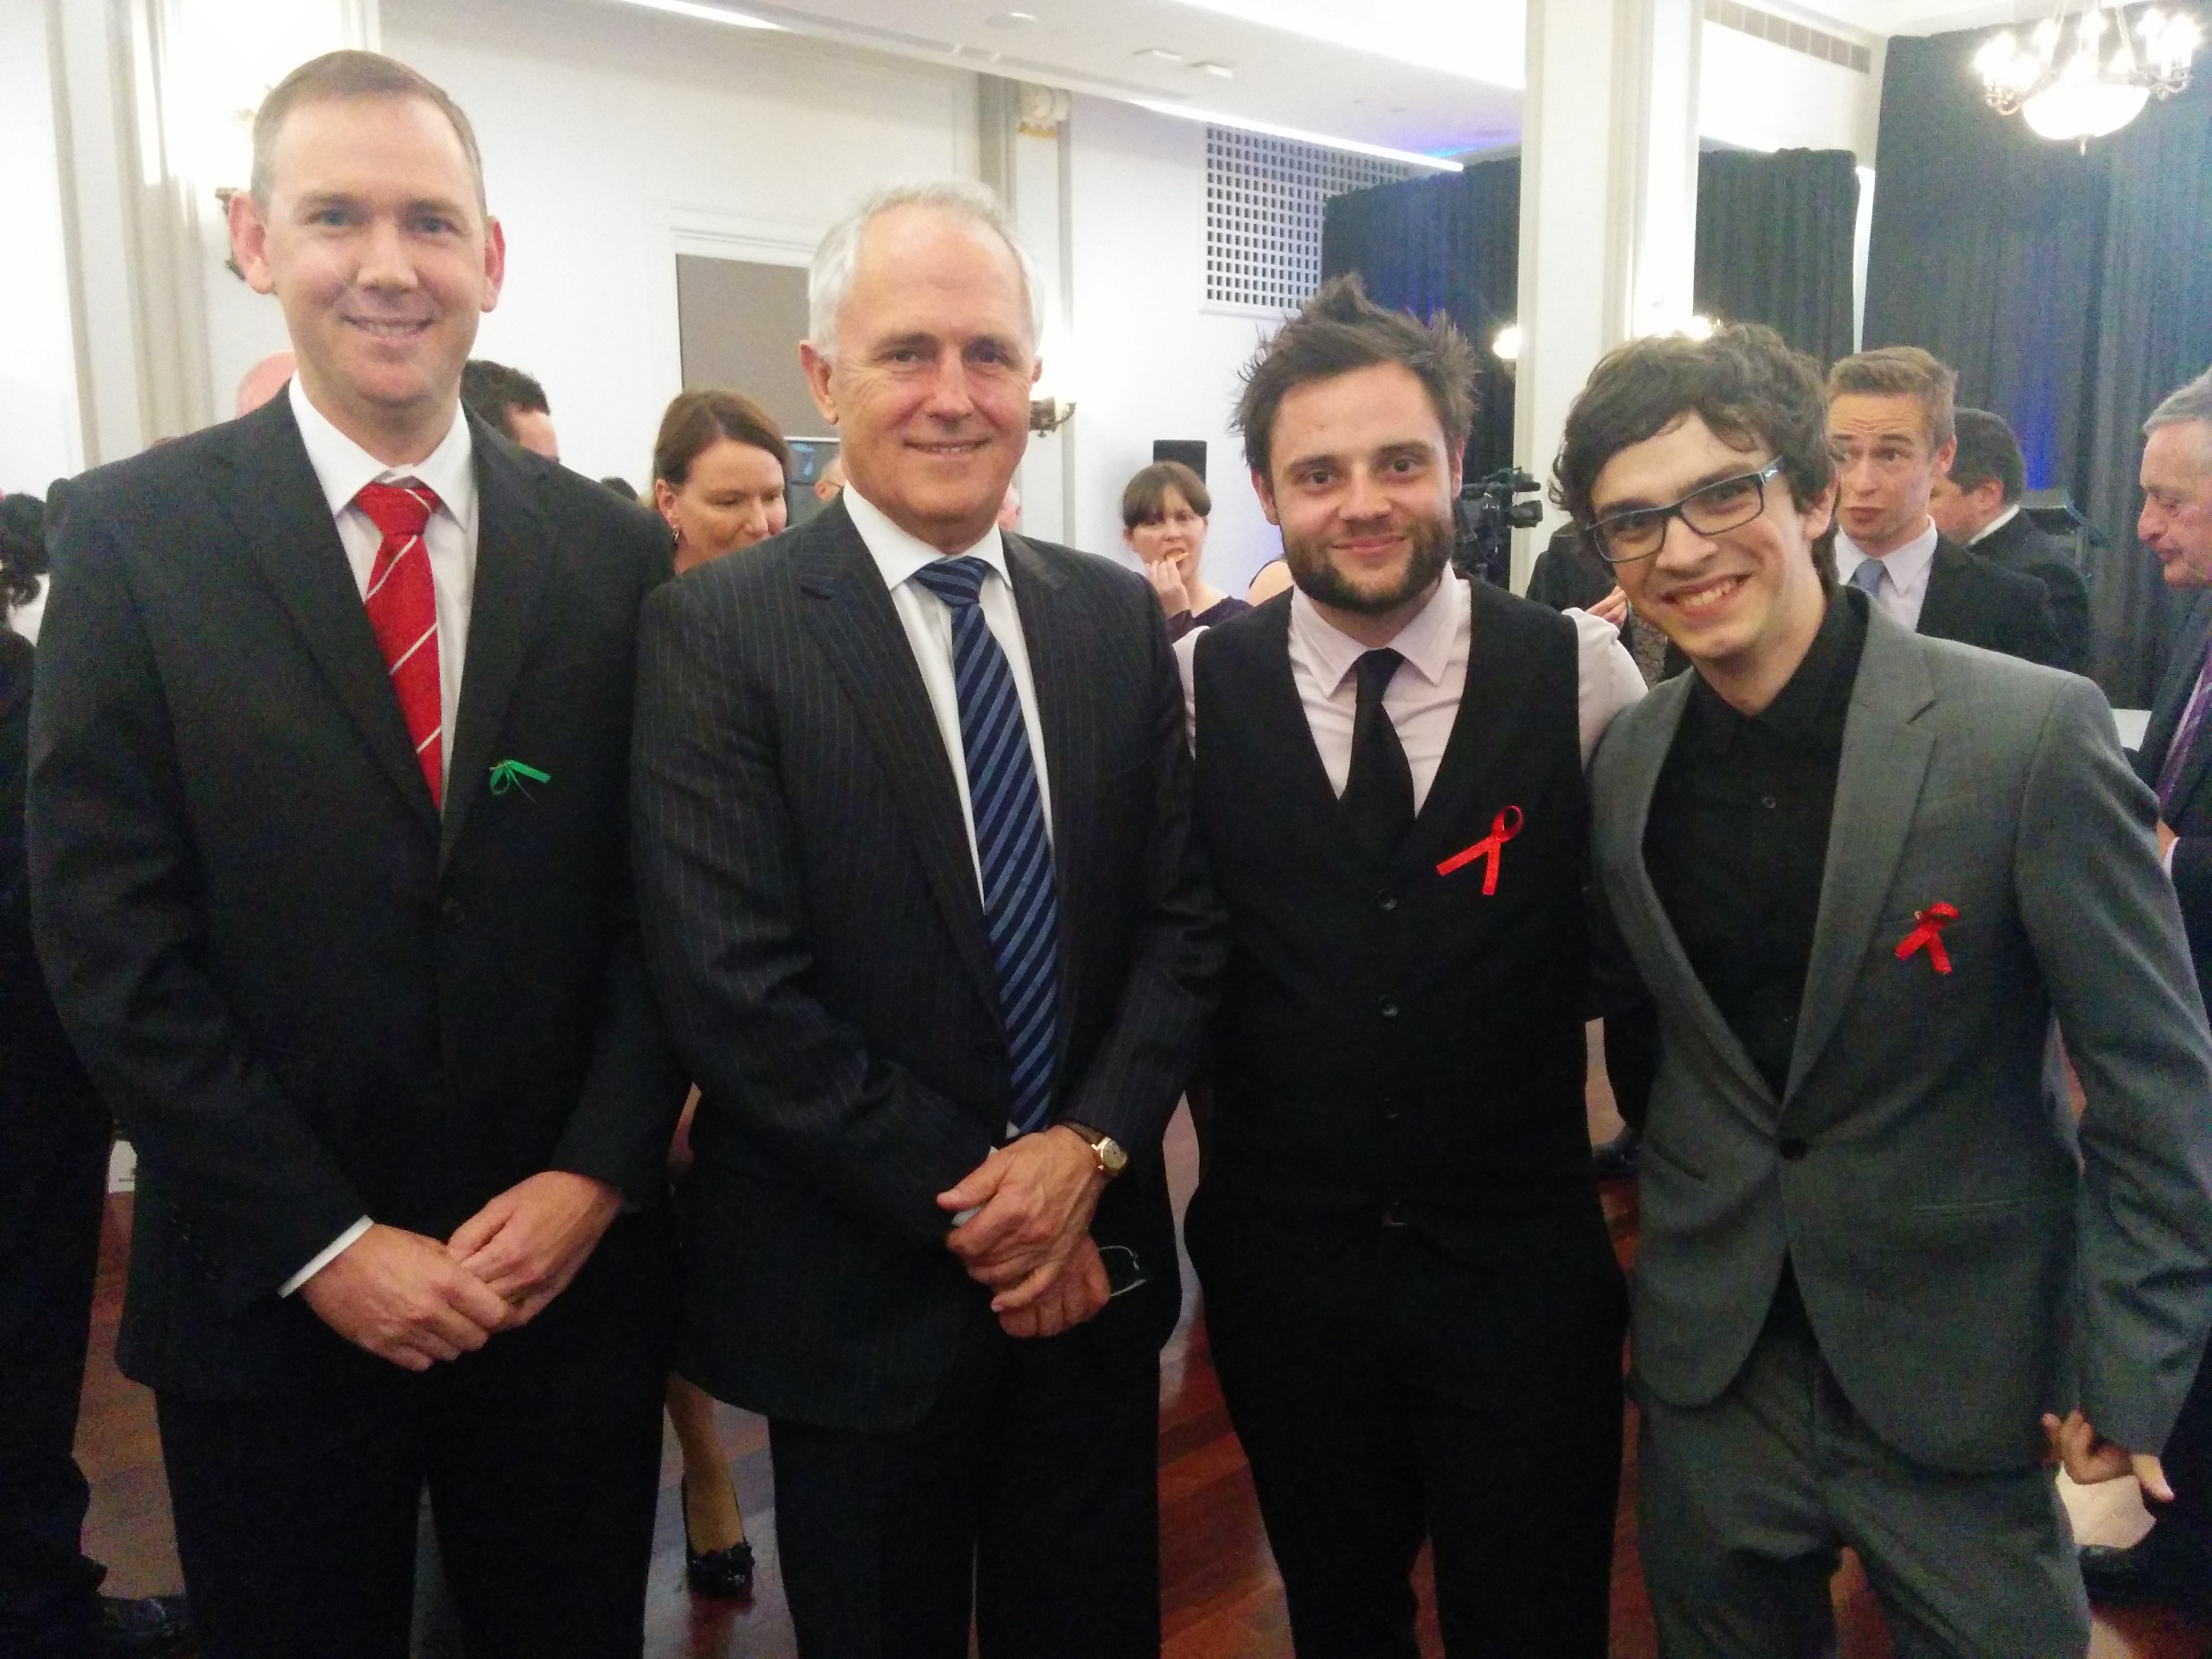 From left, Dr Jolon Faichney, Federal Minister for Communications Mr Malcolm Turnbull, Griffith graduate Mick Davies and ICT student Jordan Gardiner